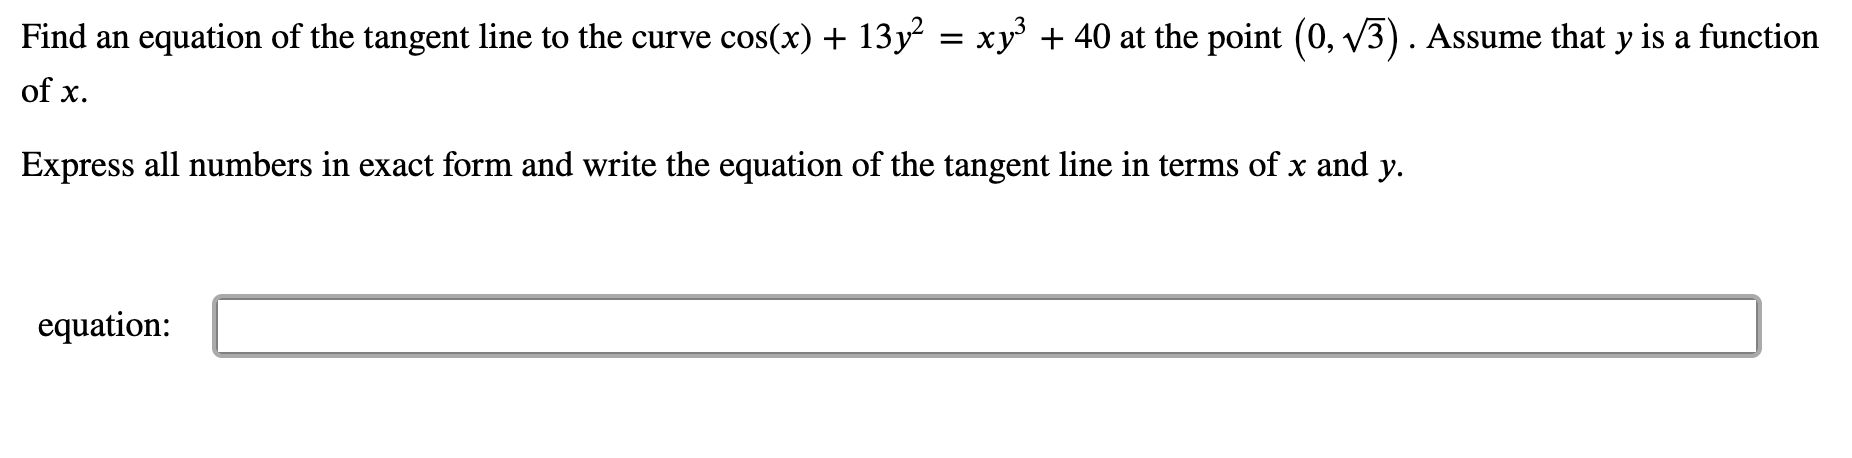 Find an equation of the tangent line to the curve cos(x) + 13y² = xy + 40 at the point (0, v3). Assume that y is a function
of x.
Express all numbers in exact form and write the equation of the tangent line in terms of x and y.
